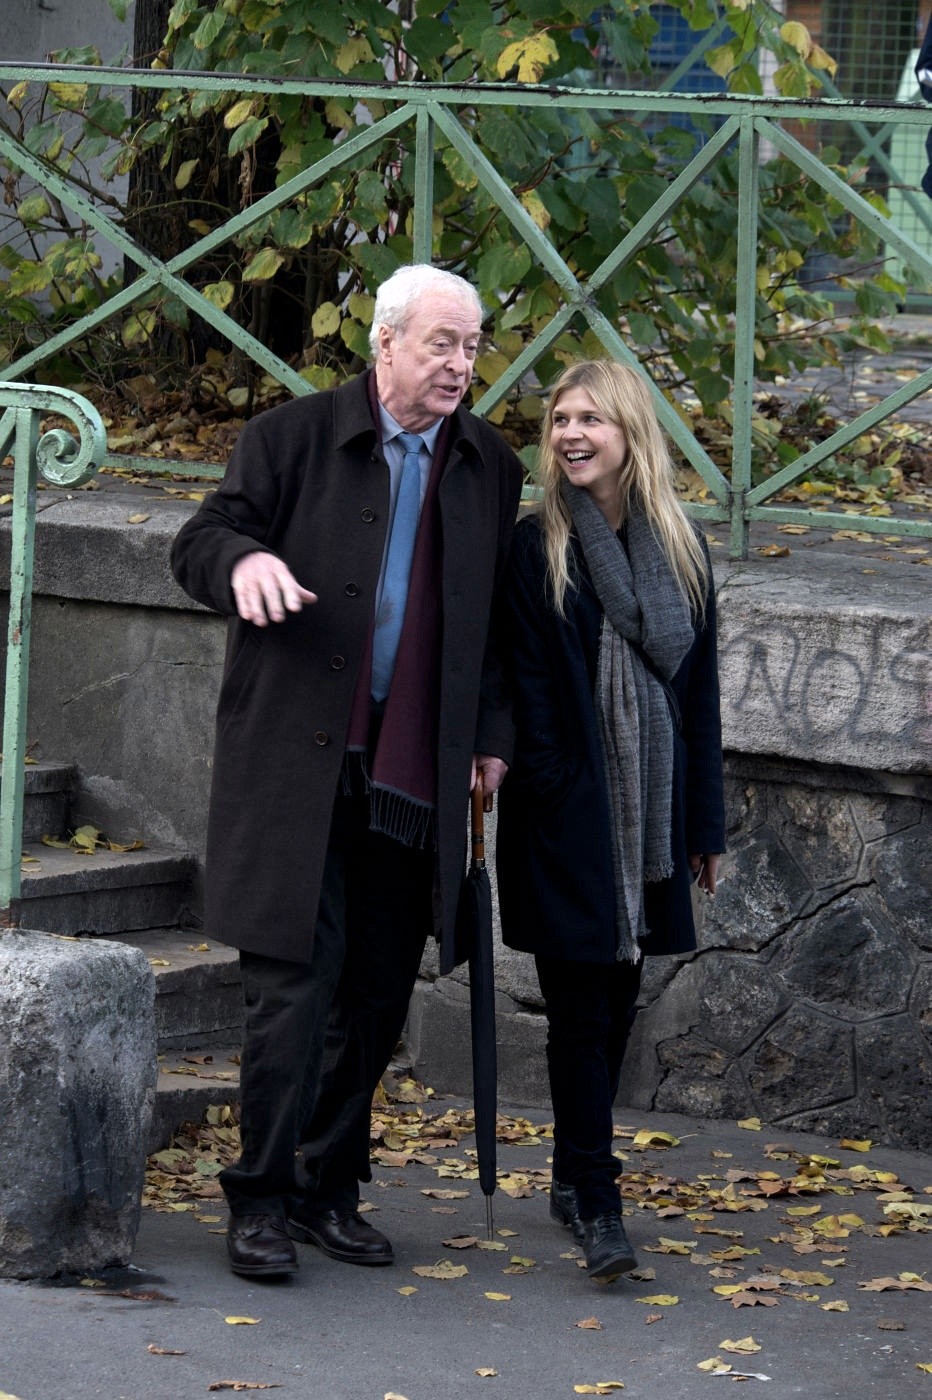 Michael Caine stars as Matthew Morgan and Clemence Poesy stars as Pauline Laubie in Image Entertainment's Last Love (2013)